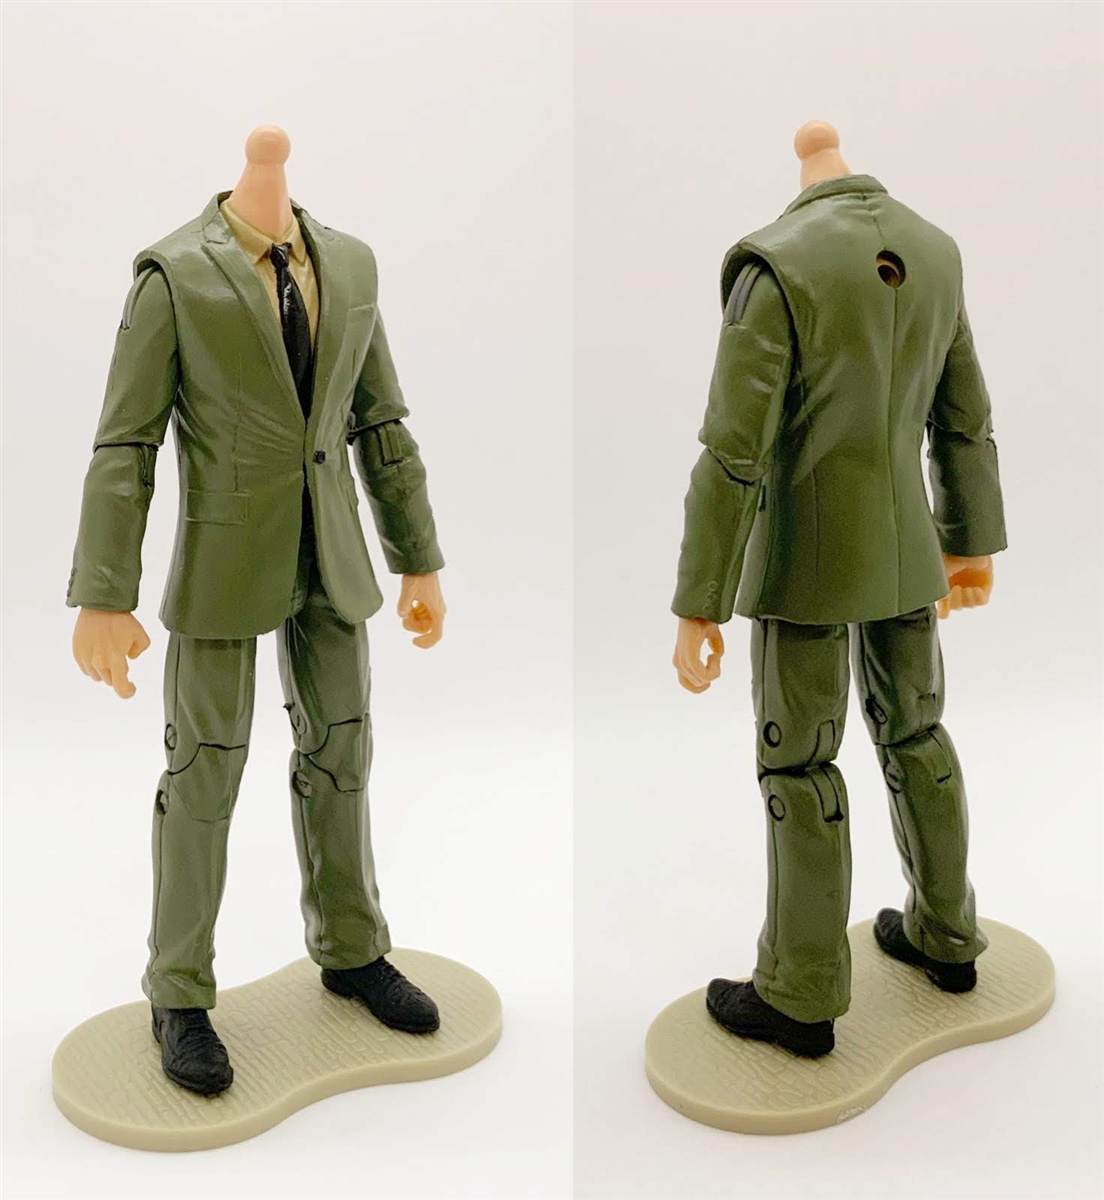 Agency-Ops GREEN SUIT & TAN SHIRT with LIGHT Skin Tone